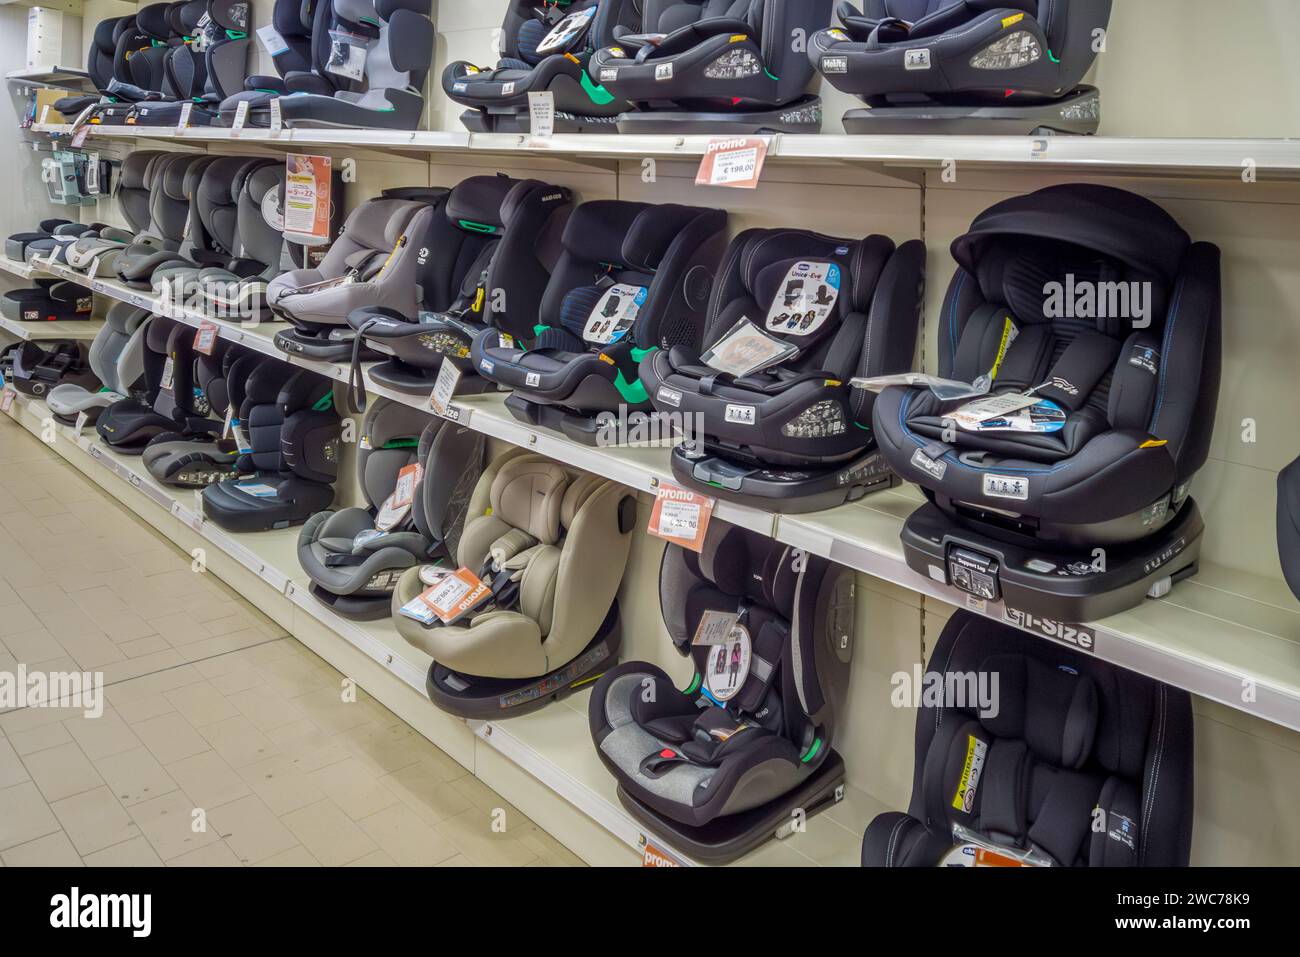 Italy - December 19, 2023: safety car seat for baby of various and different types displayed on shelves for sale in baby store Stock Photo